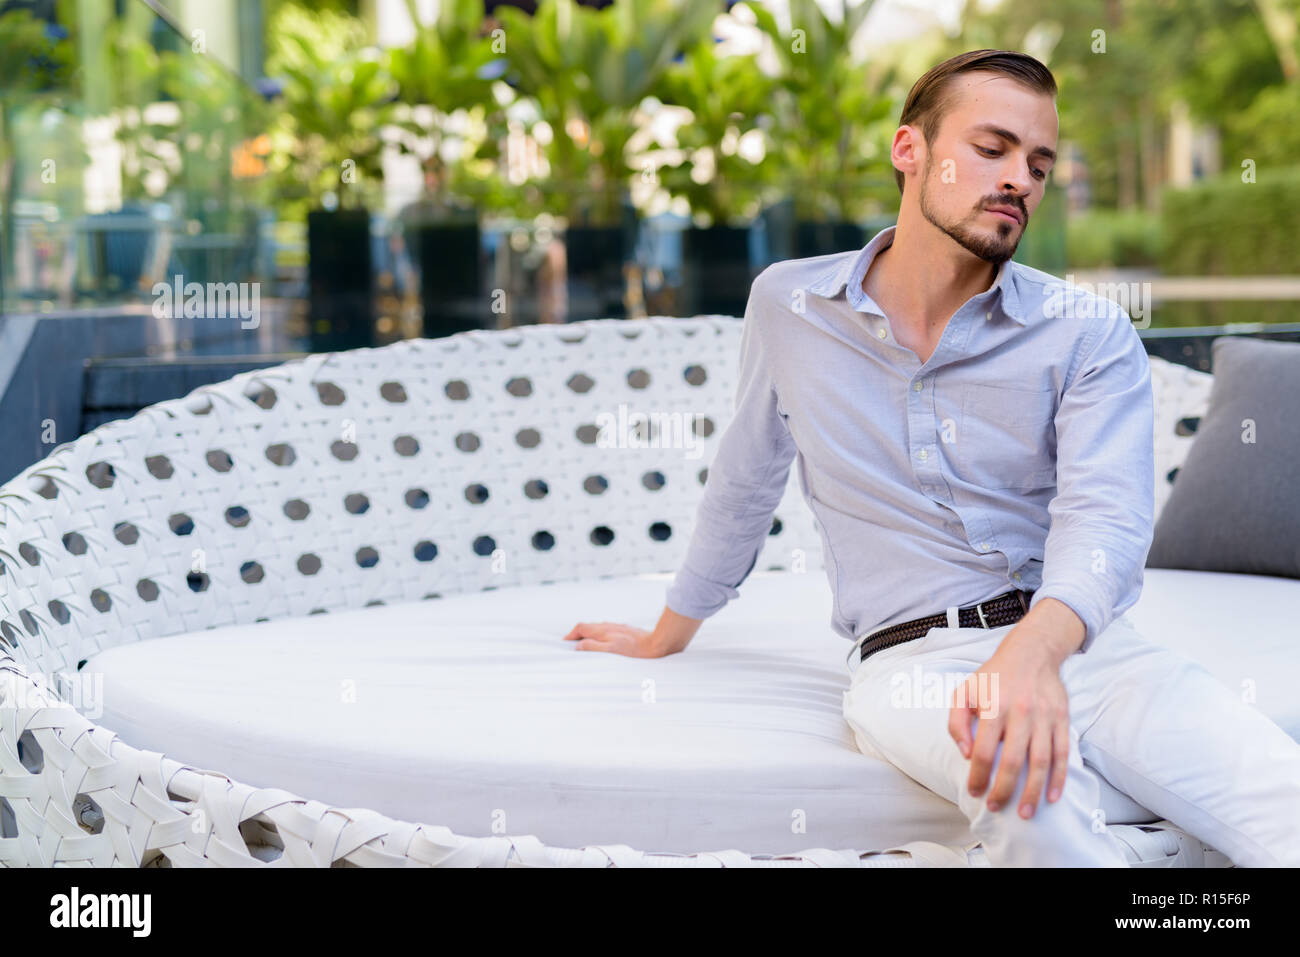 Portrait of young bearded fashionable man sitting outdoors Stock Photo